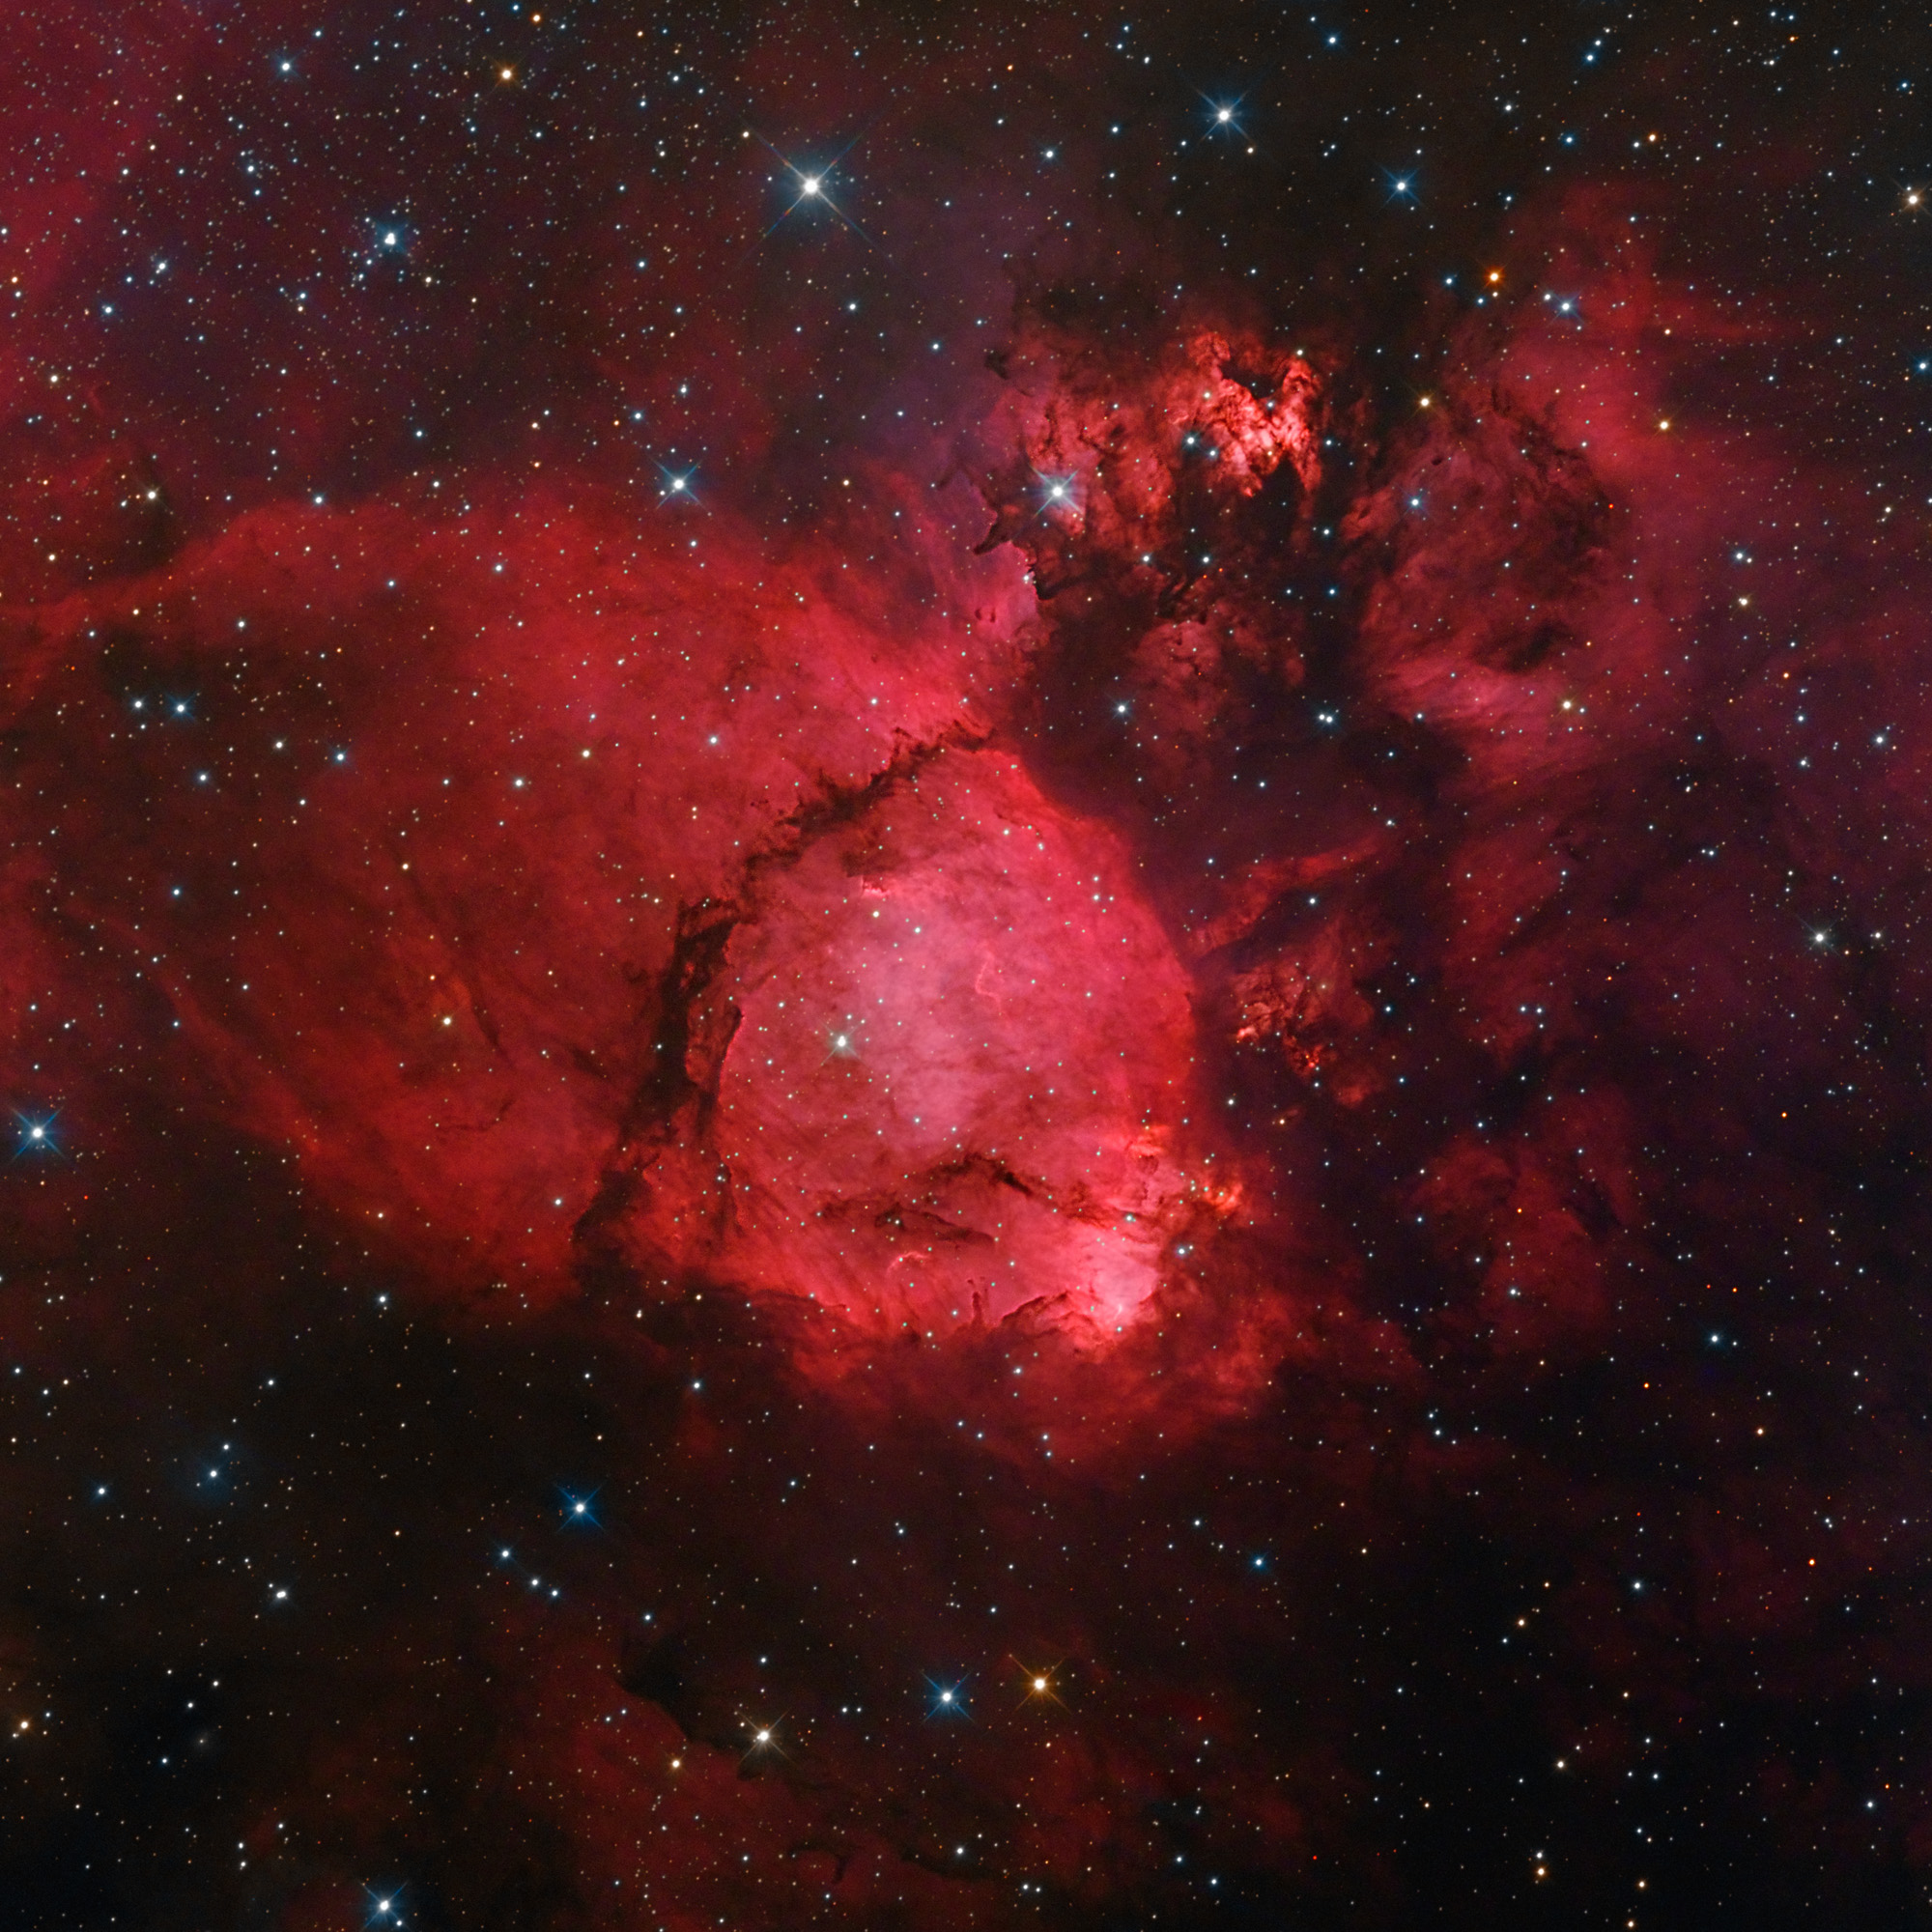 A sharp cosmic portrait features glowing gas and obscuring dust clouds in IC 1795, a star forming region in the northern constellation Cassiopeia. The nebula's remarkable details, shown in its dominant red color, were captured using a sensitive camera, and long exposures that include image data from a narrowband filter taken from Eagle Ridge Observatory in Calif. on Sept. 26-27, 2011.